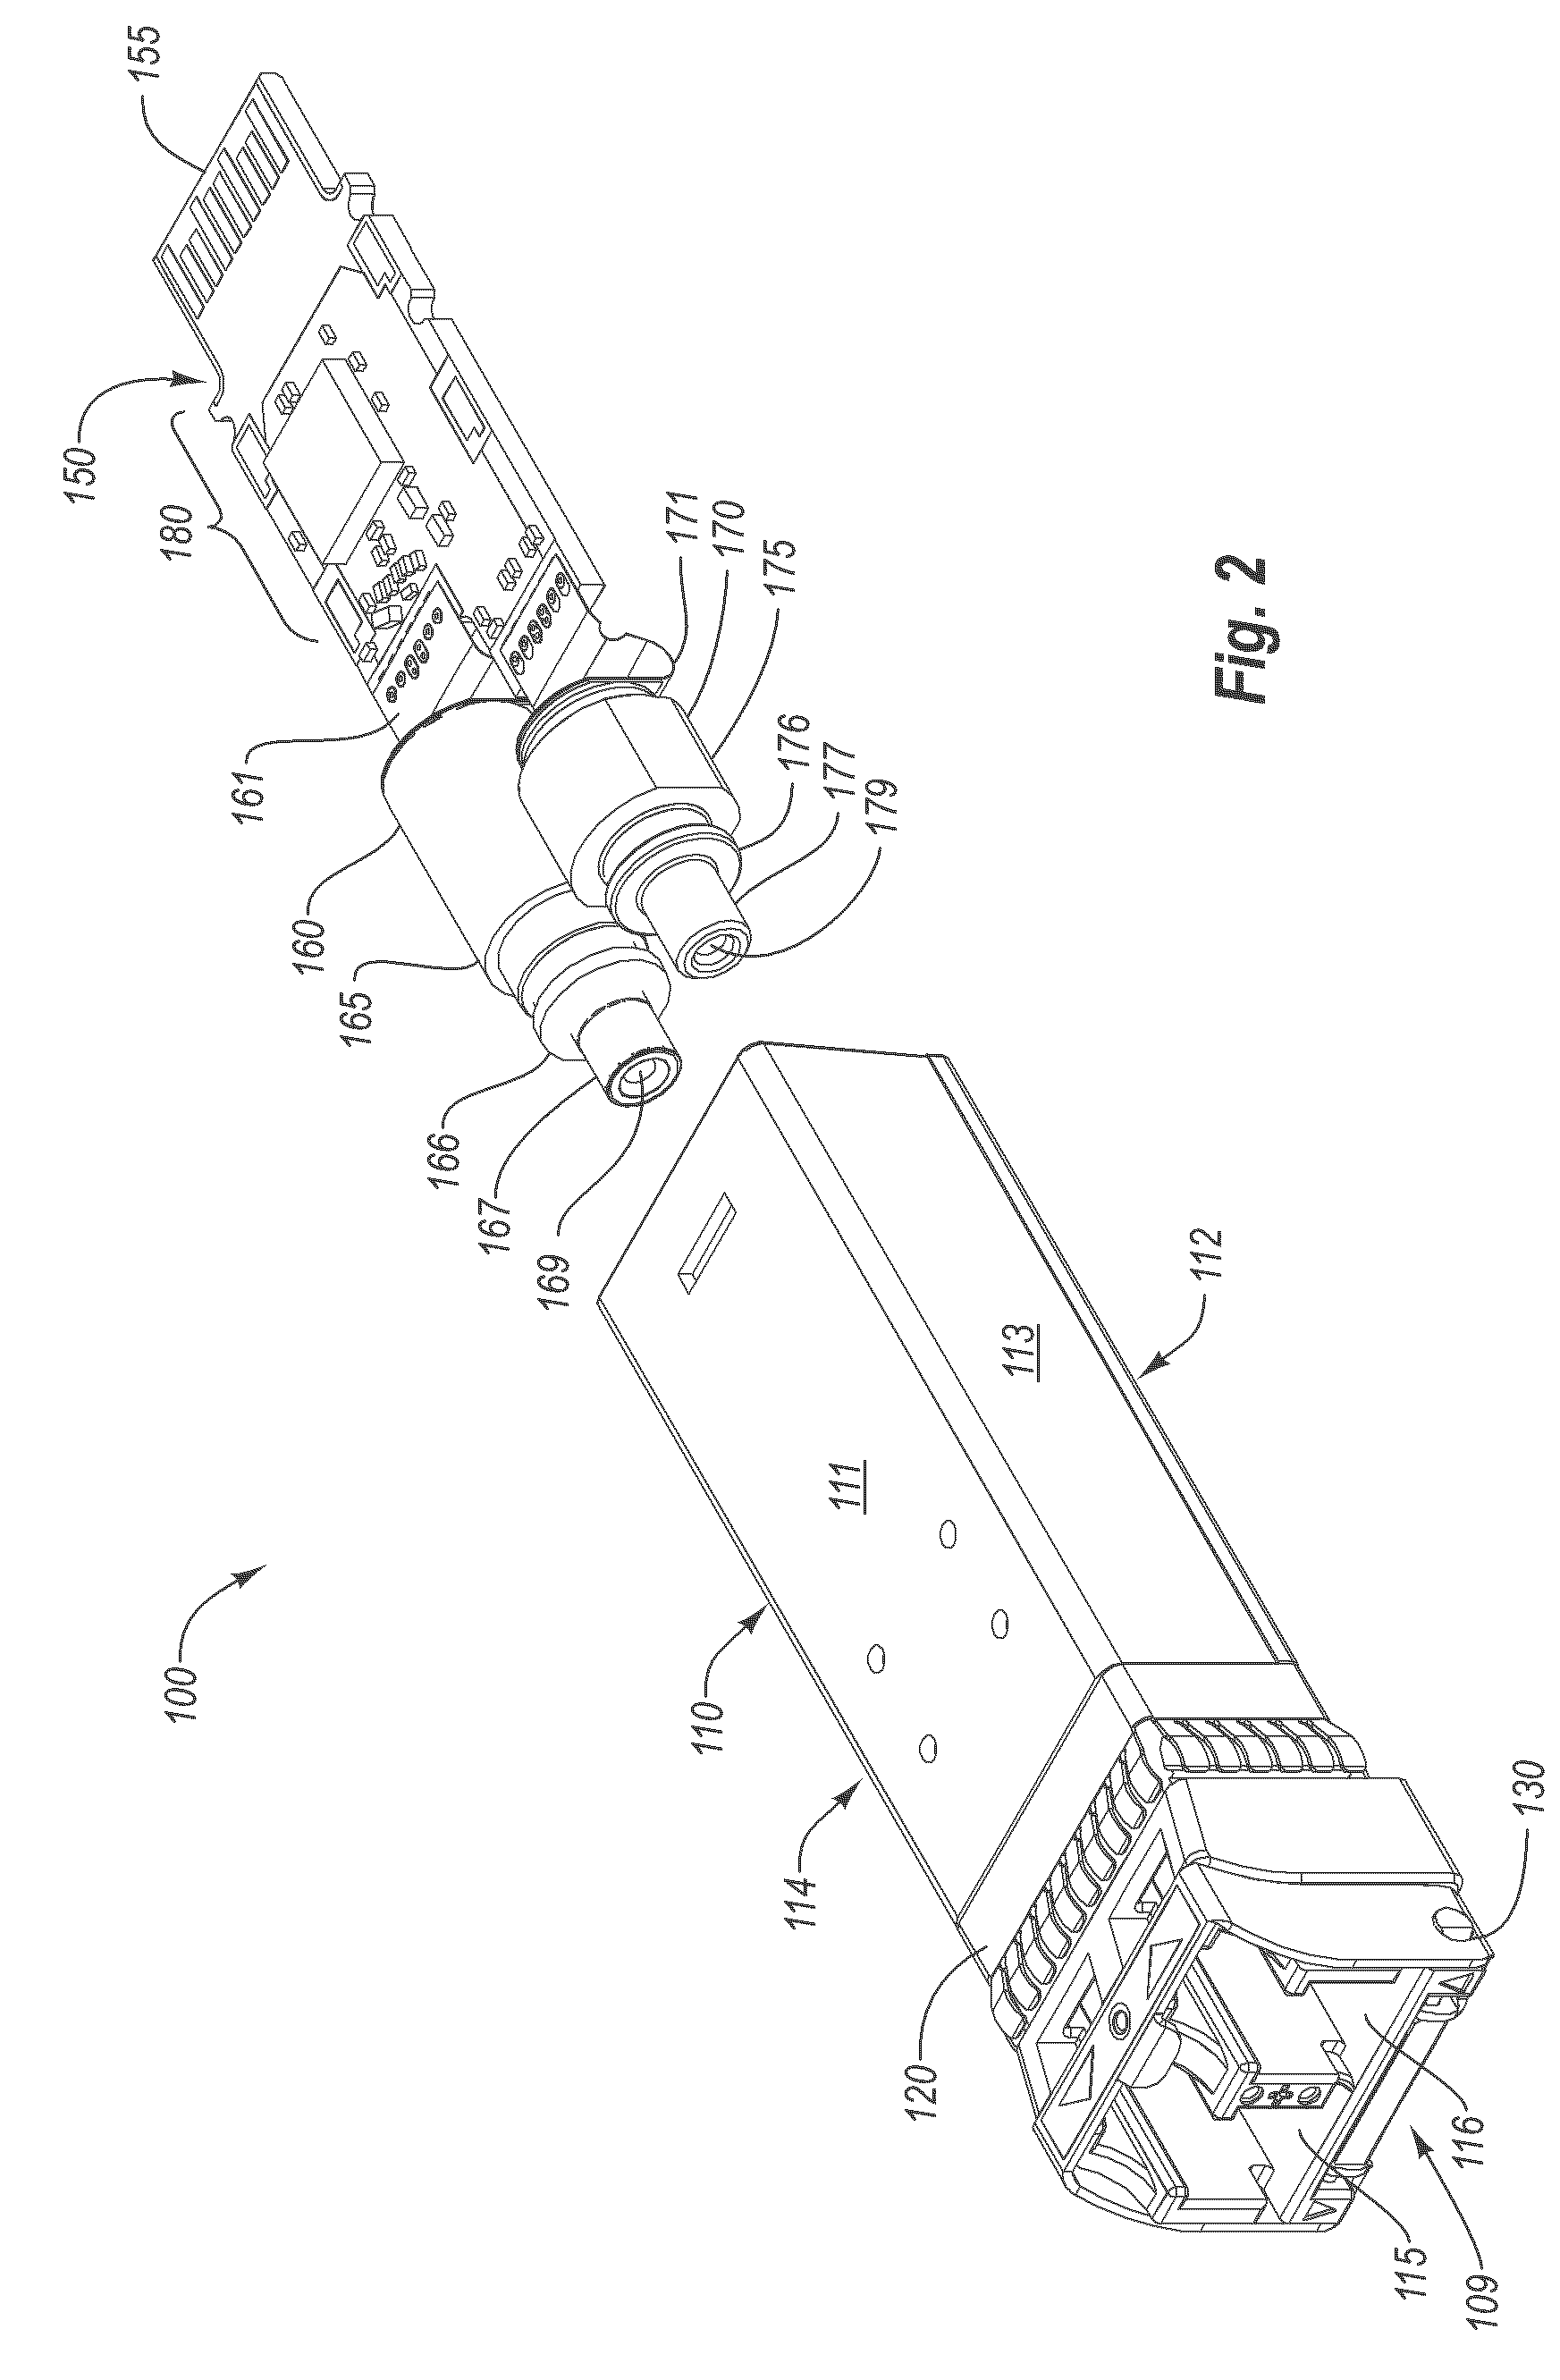 Monolithic shell for an optical electrical device